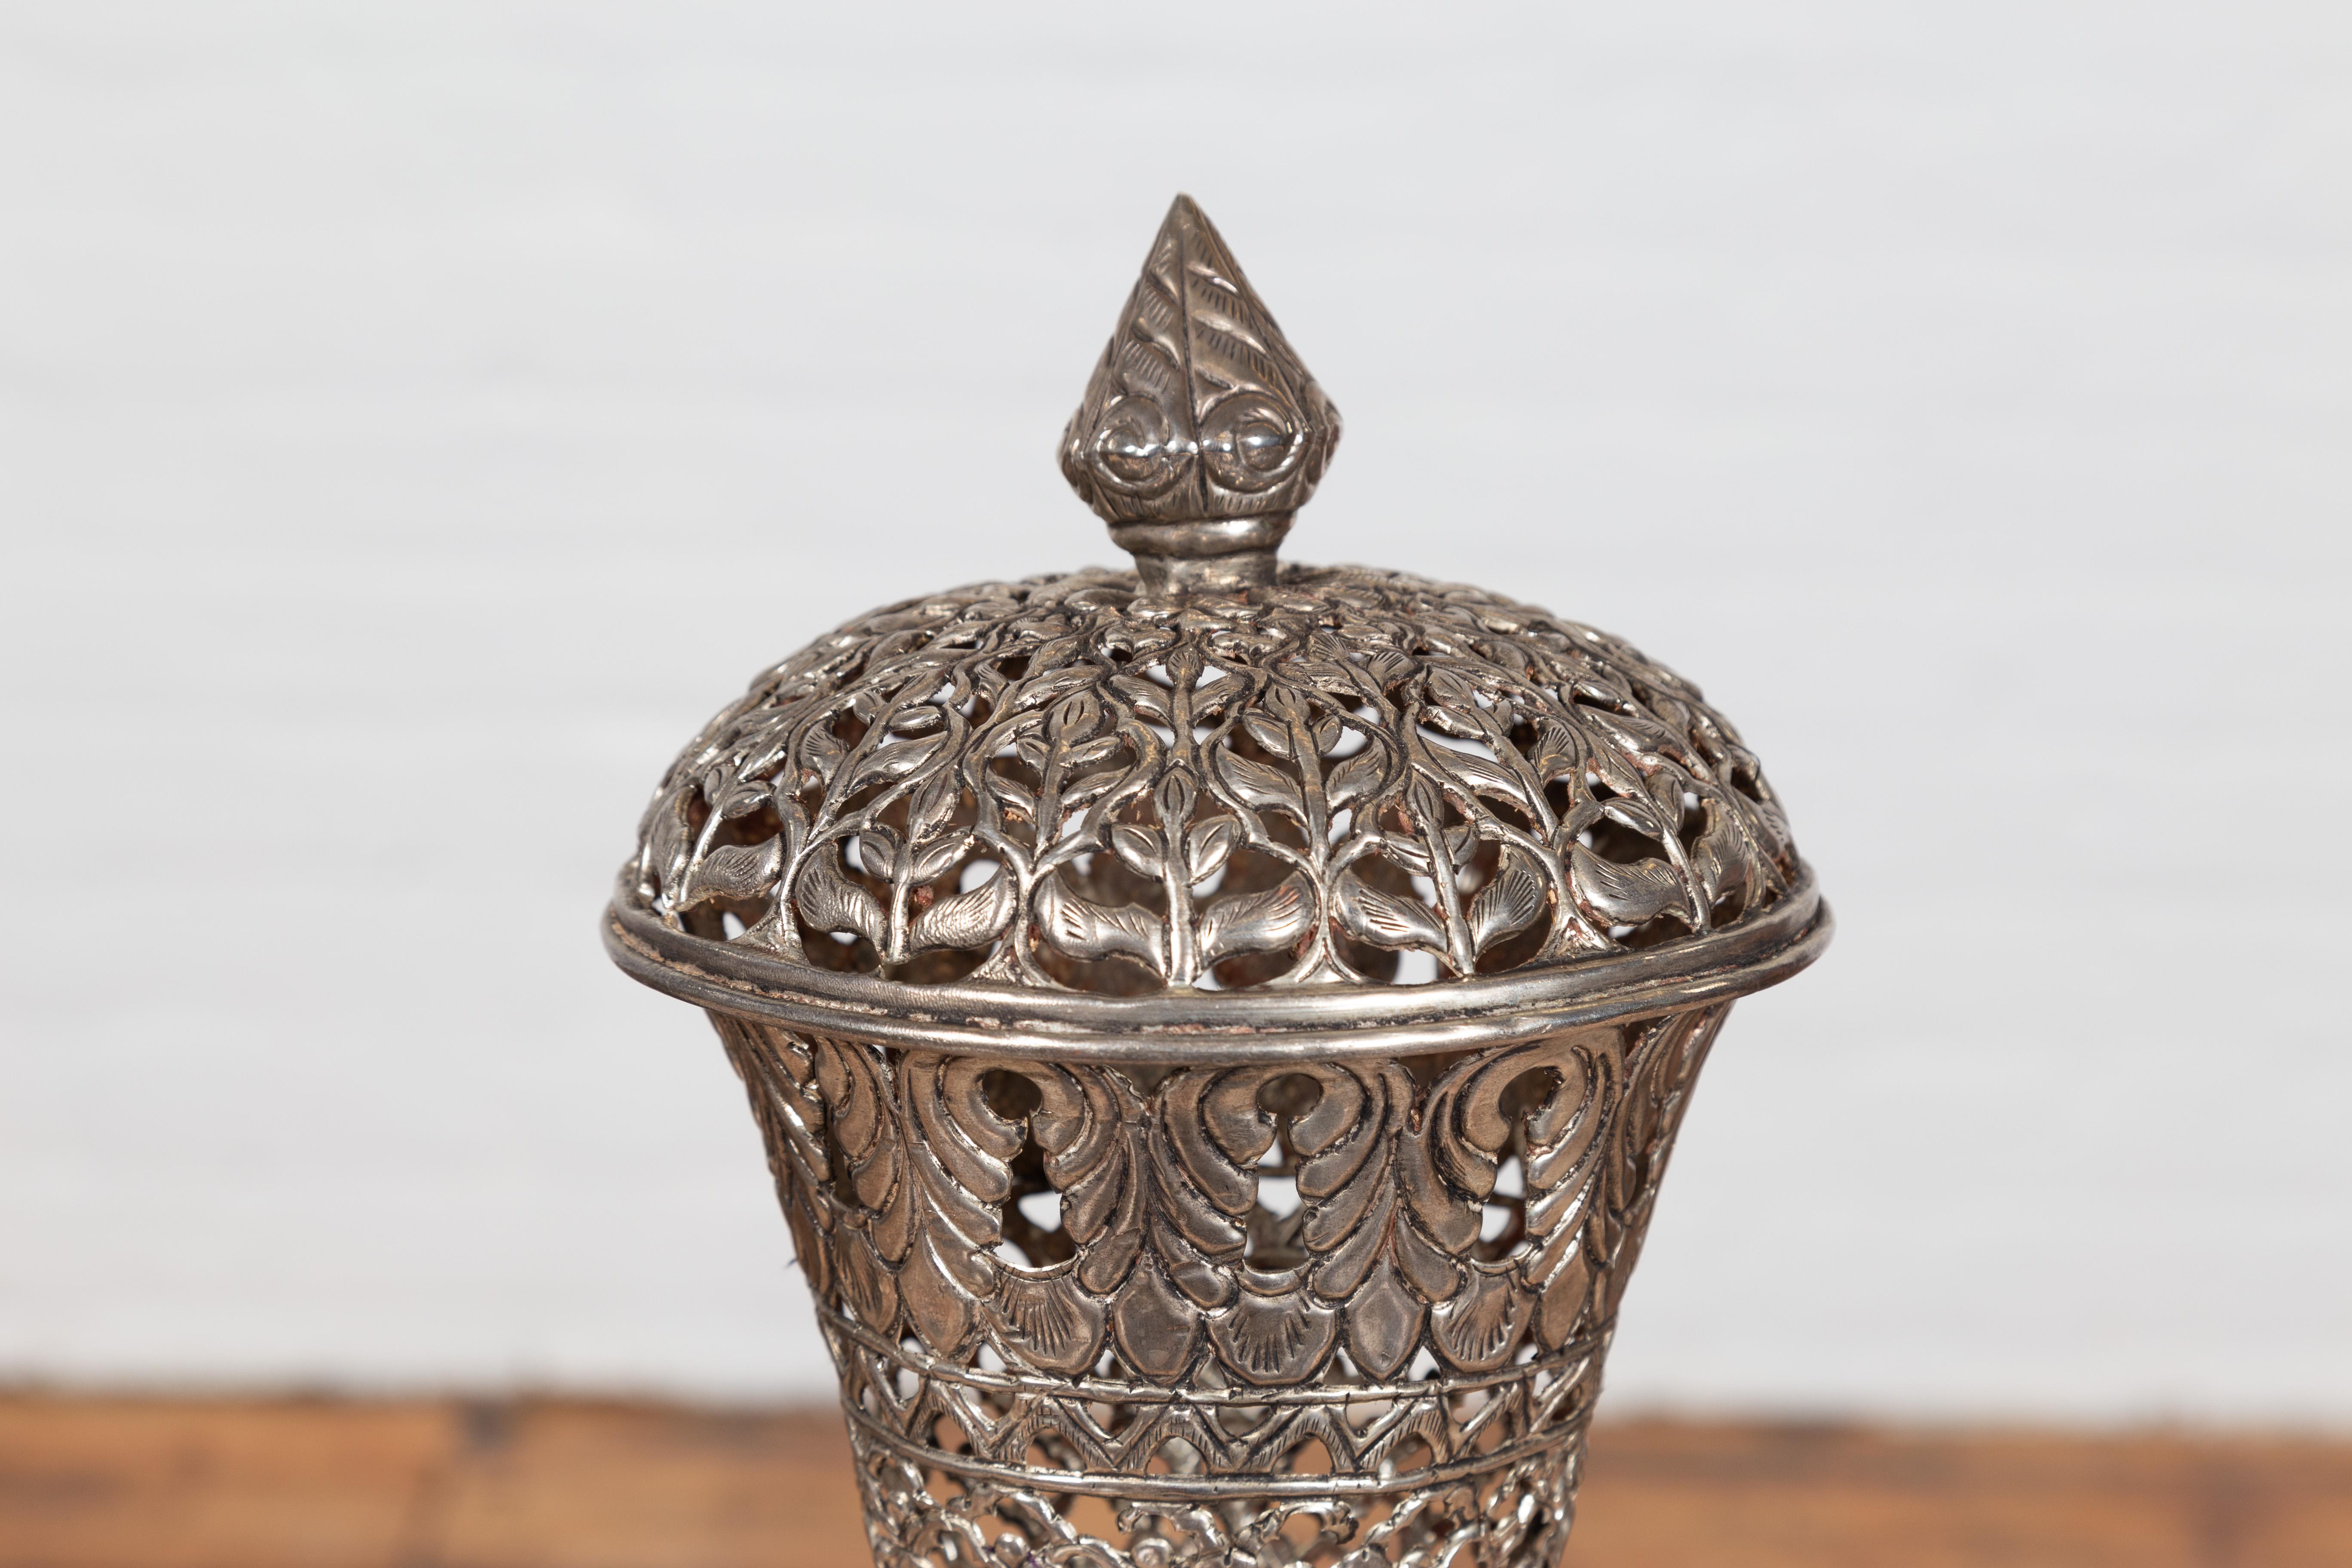 Silver Plate Indian Vintage Silverplate Brass Covered Candle Holder with Open Fretwork